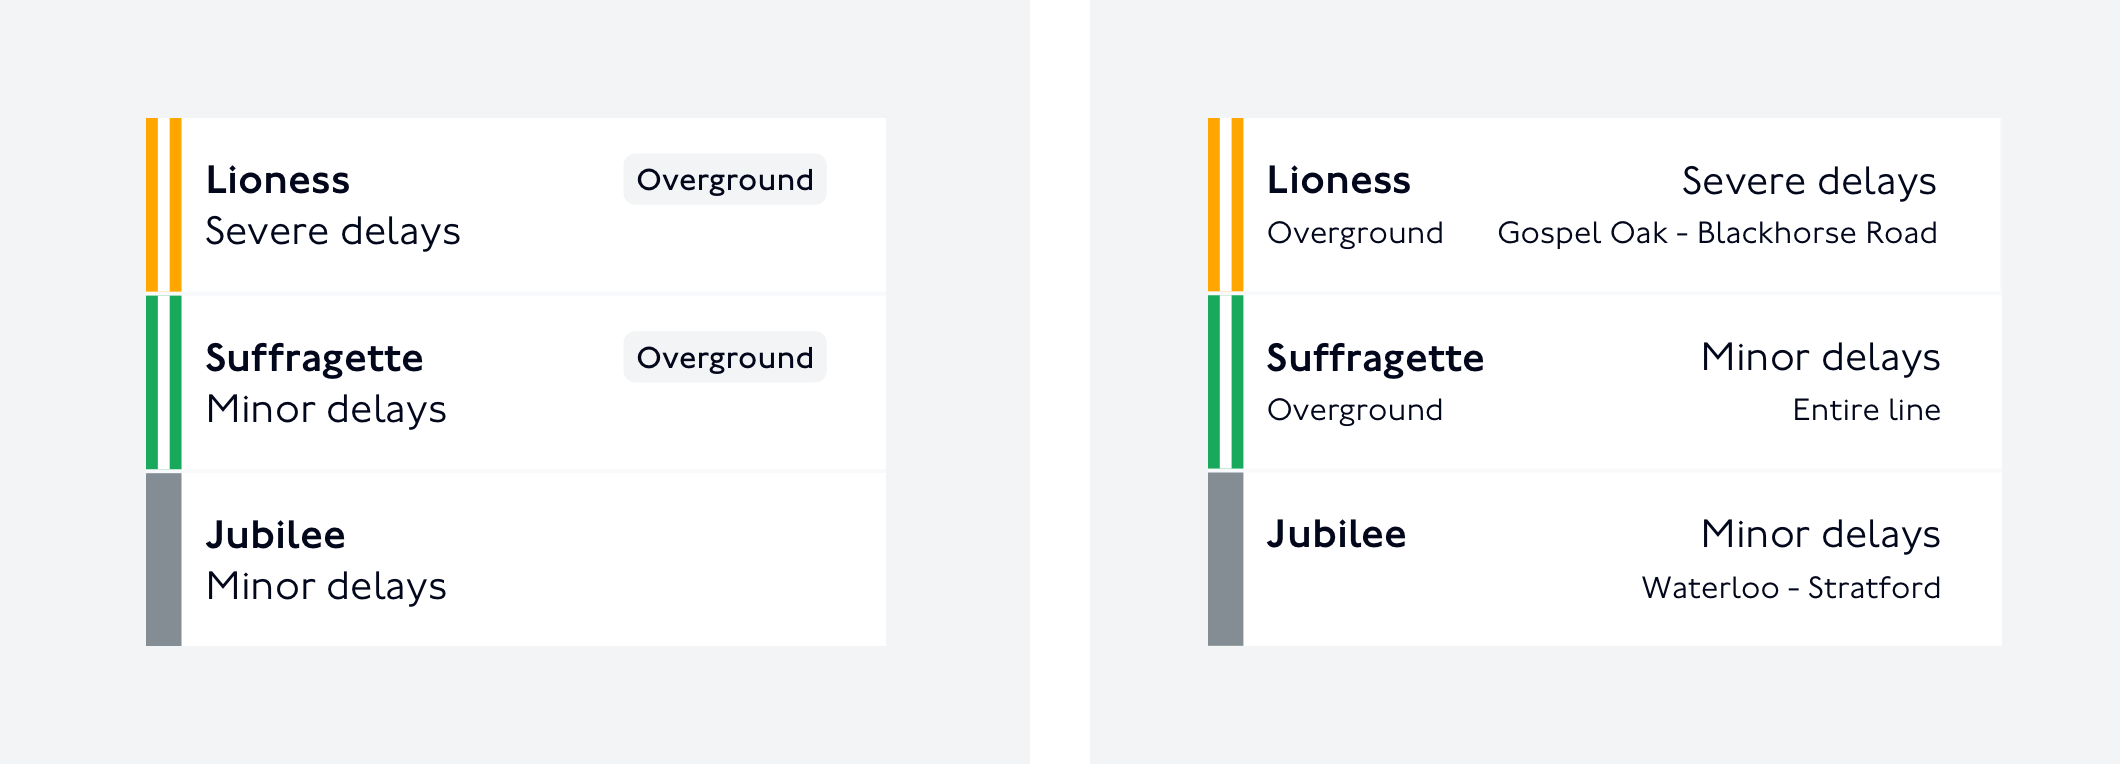 Two examples of designs for a list of line disruptions. Each disrupted line is represented by a white rectangle containing graphics and text. On the first example, London Overground disruptions are represented with the line and disruption names, a dual line in the line colour, and a grey label with the word “Overground”. A London Underground disruption is represented with the line and disruption names and a block in the line colour. On the second example, London Overground disruptions include the line name, the disruption name, the affected line segment, a dual line in the line colour and the word “Overground”. A London Underground disruption is represented the line and disruption name, the affected line segment, and a block in the line colour.